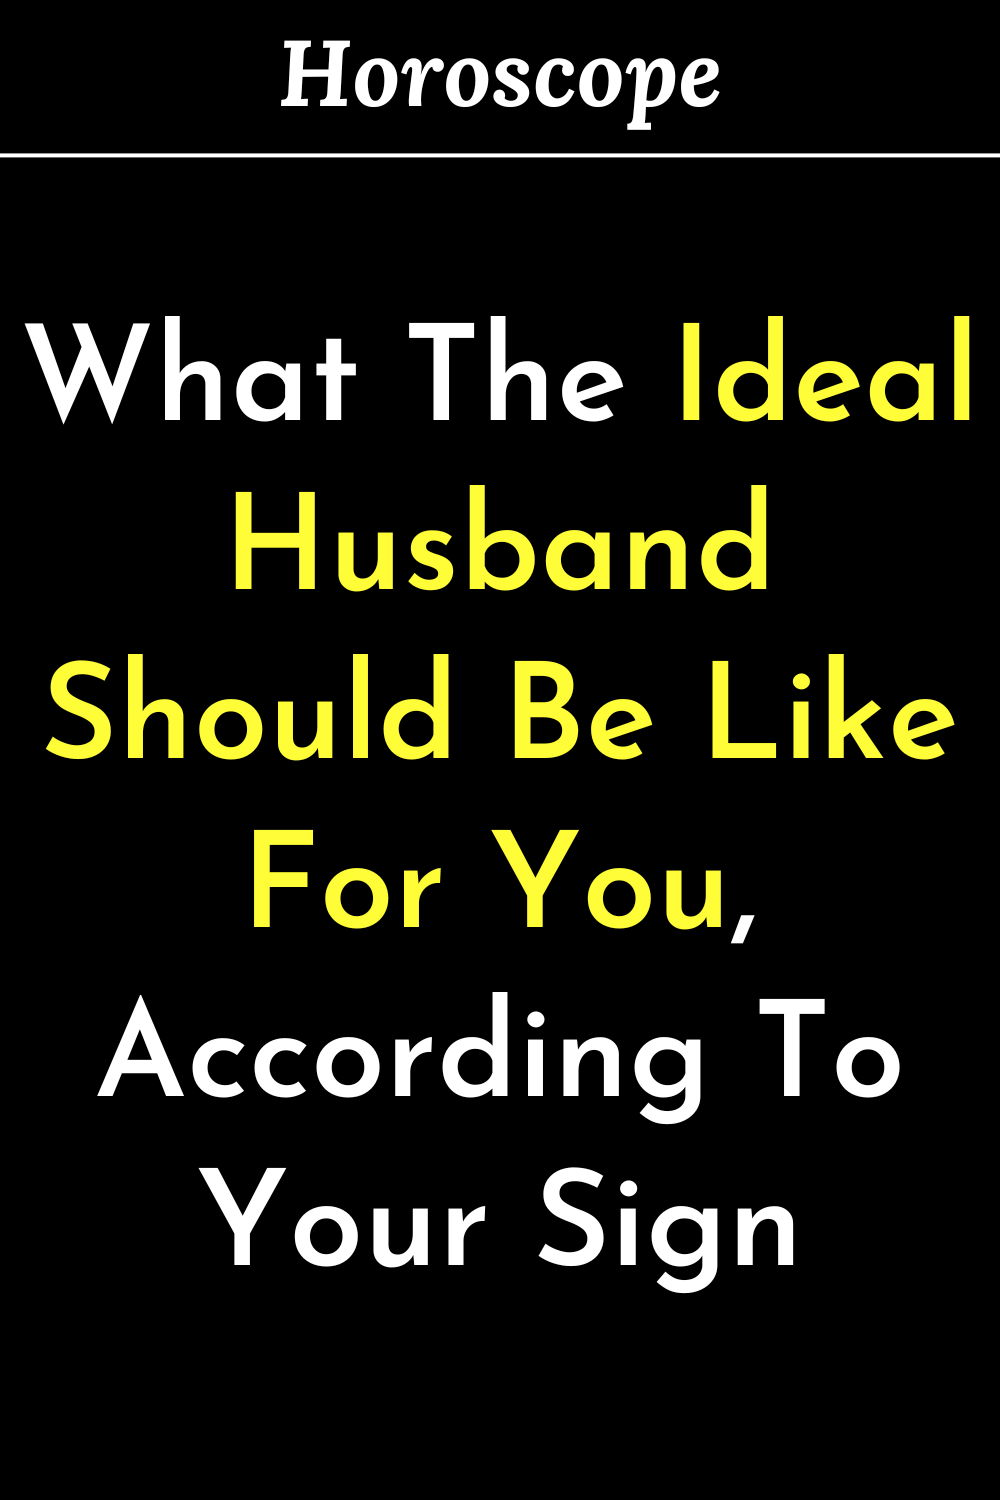 What The Ideal Husband Should Be Like For You, According To Your Sign